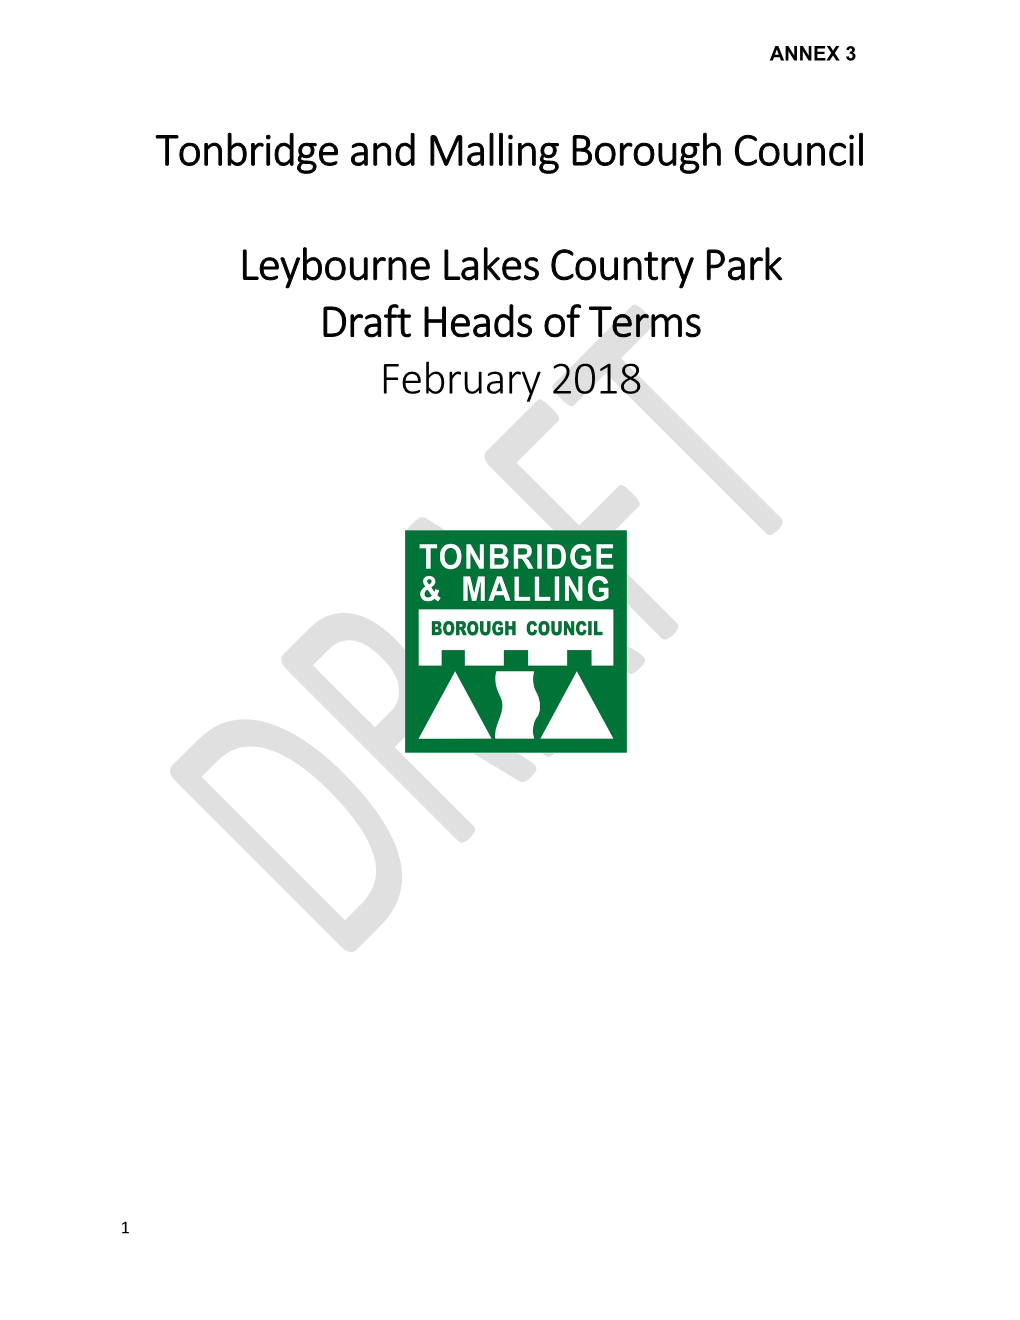 Tonbridge and Malling Borough Council Leybourne Lakes Country Park Draft Heads of Terms February 2018